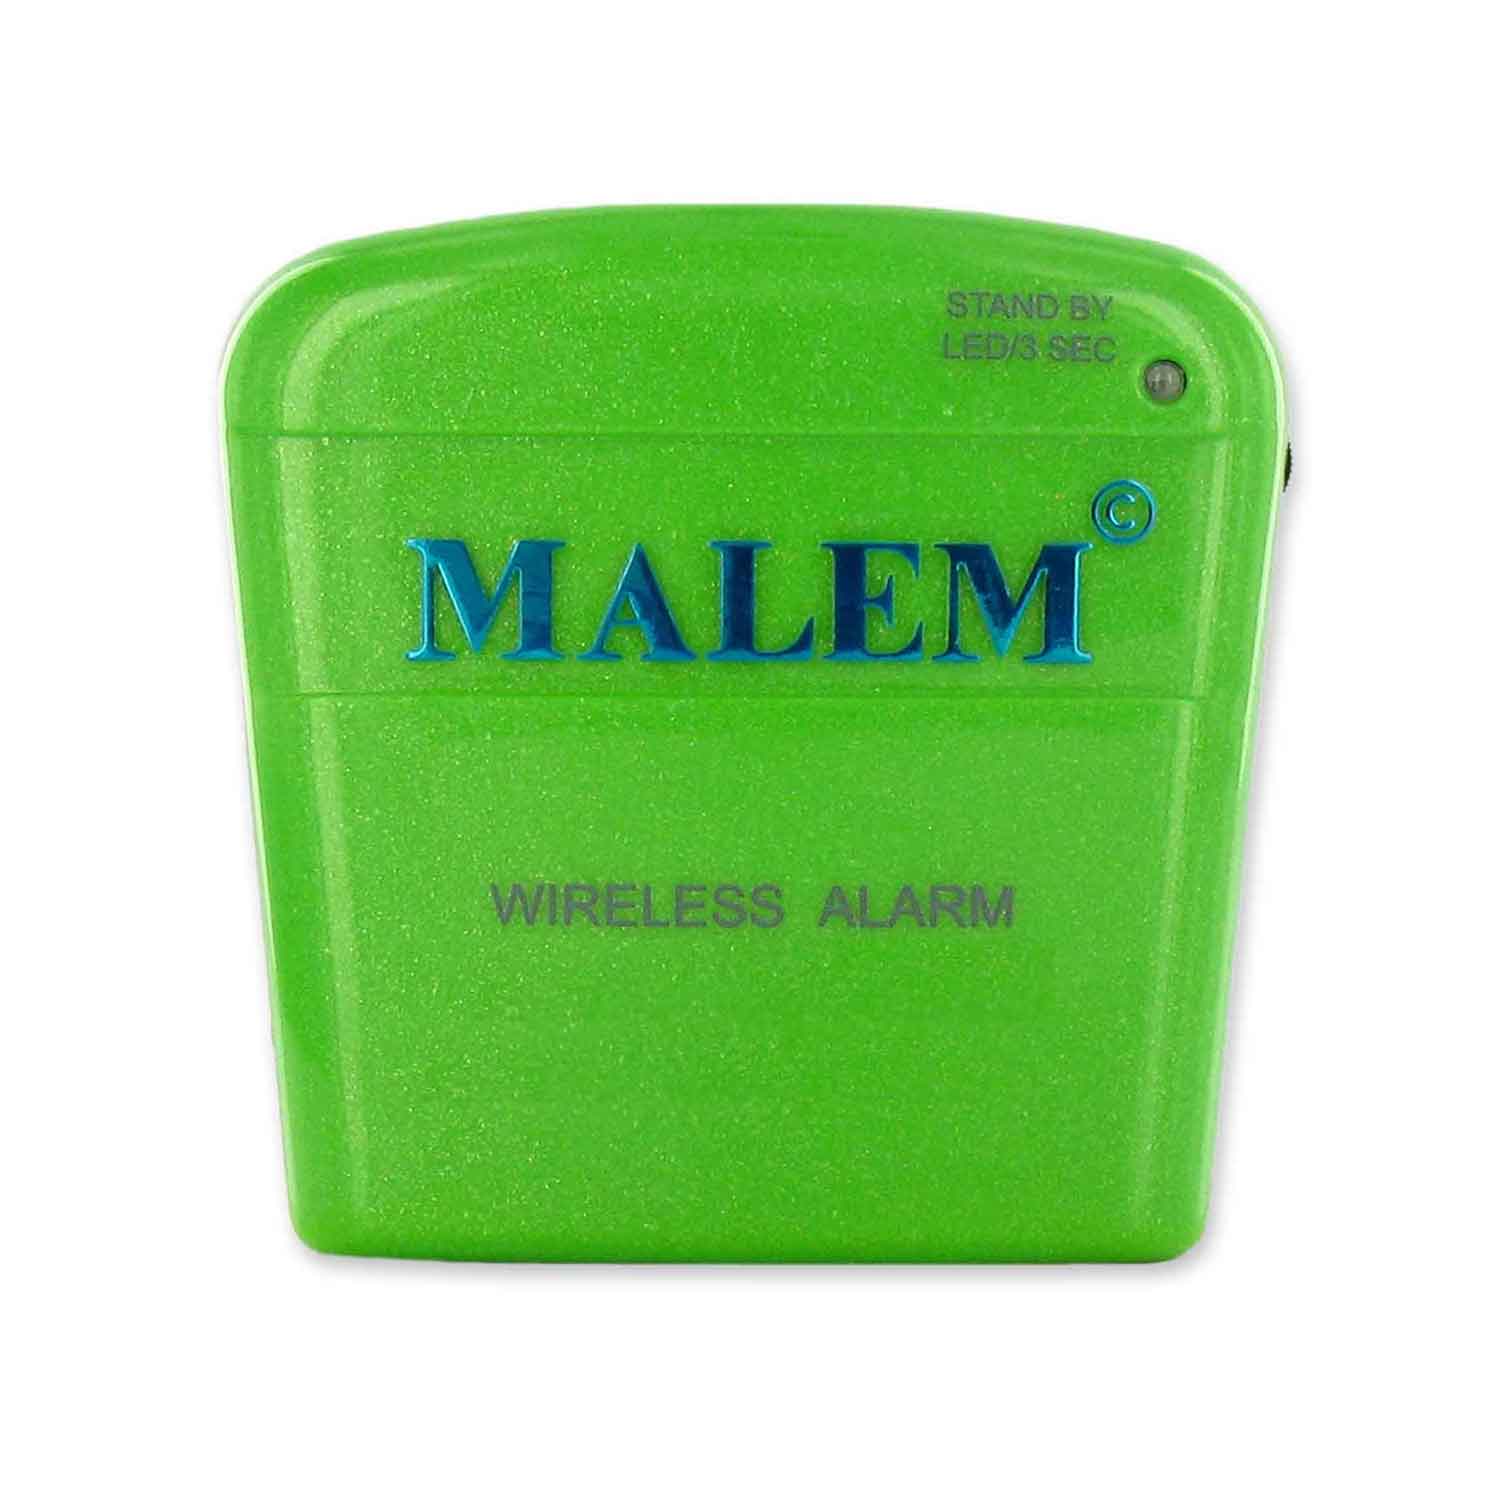 Accessories-Second Receiver for Malem Wireless